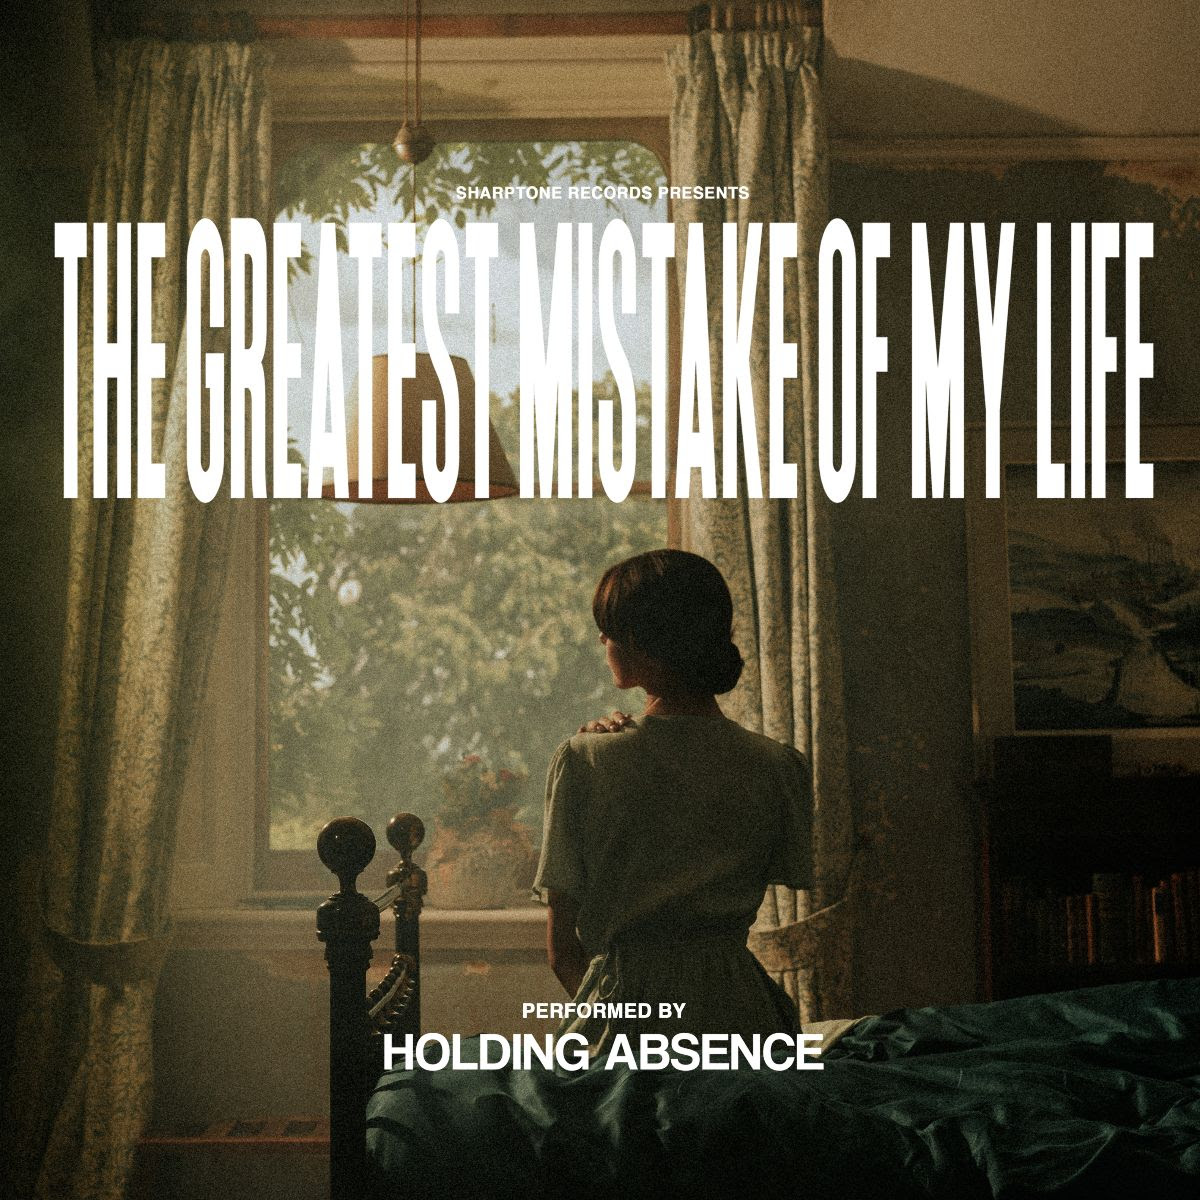 Holding Absence – The Greatest Mistake Of My Life